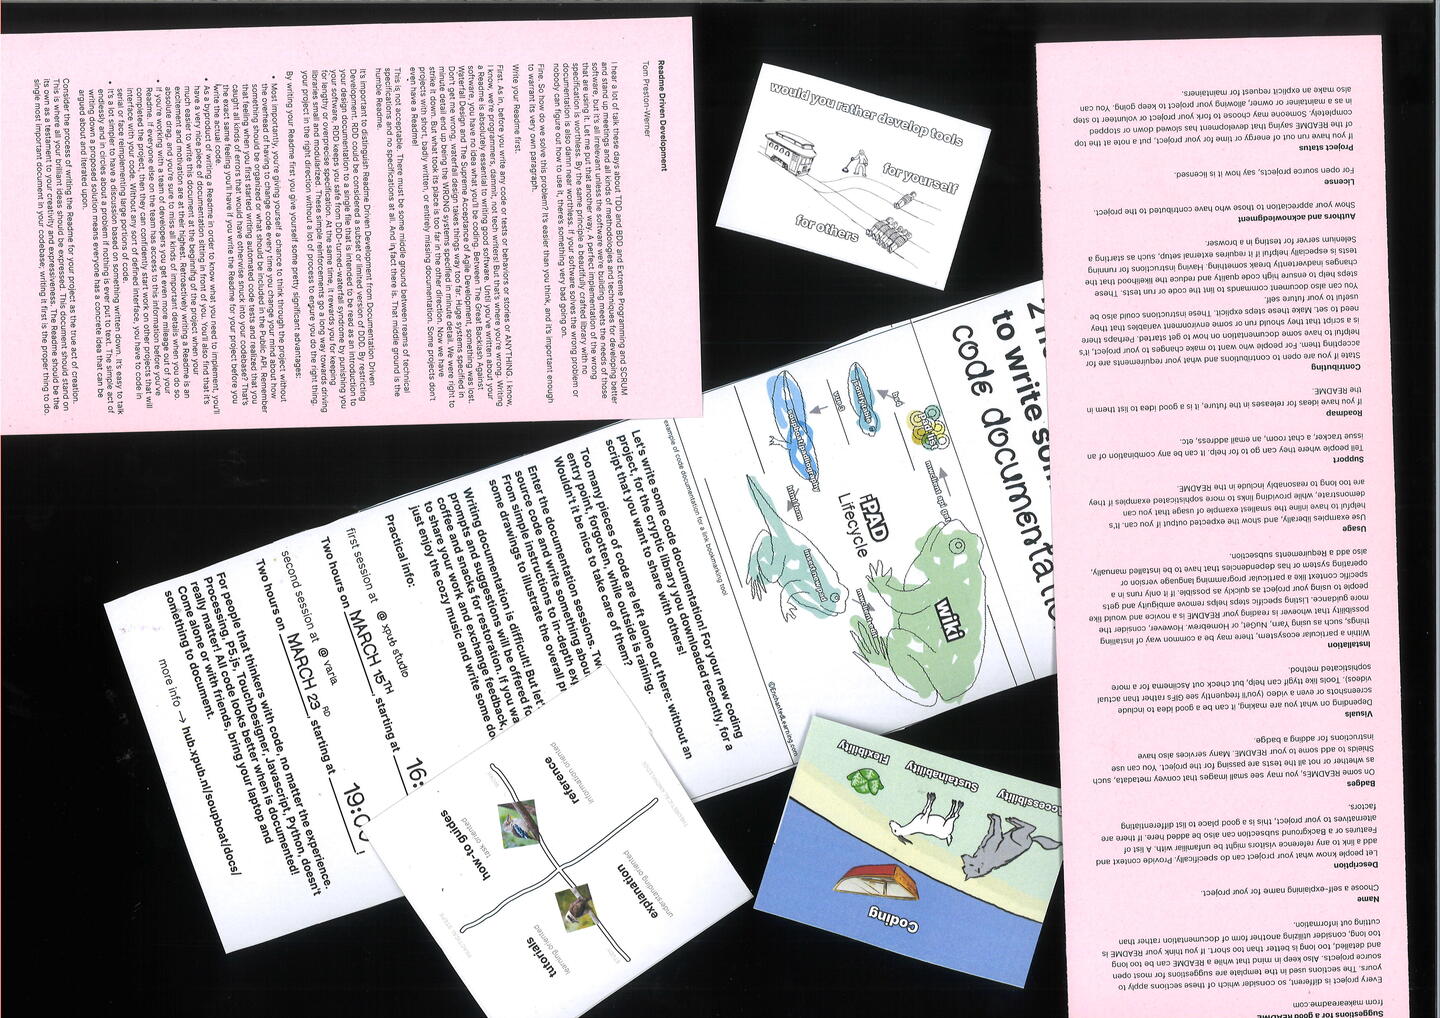 scanned materials for the documentation sessions. some sticker, flyers and text, printed on pink paper